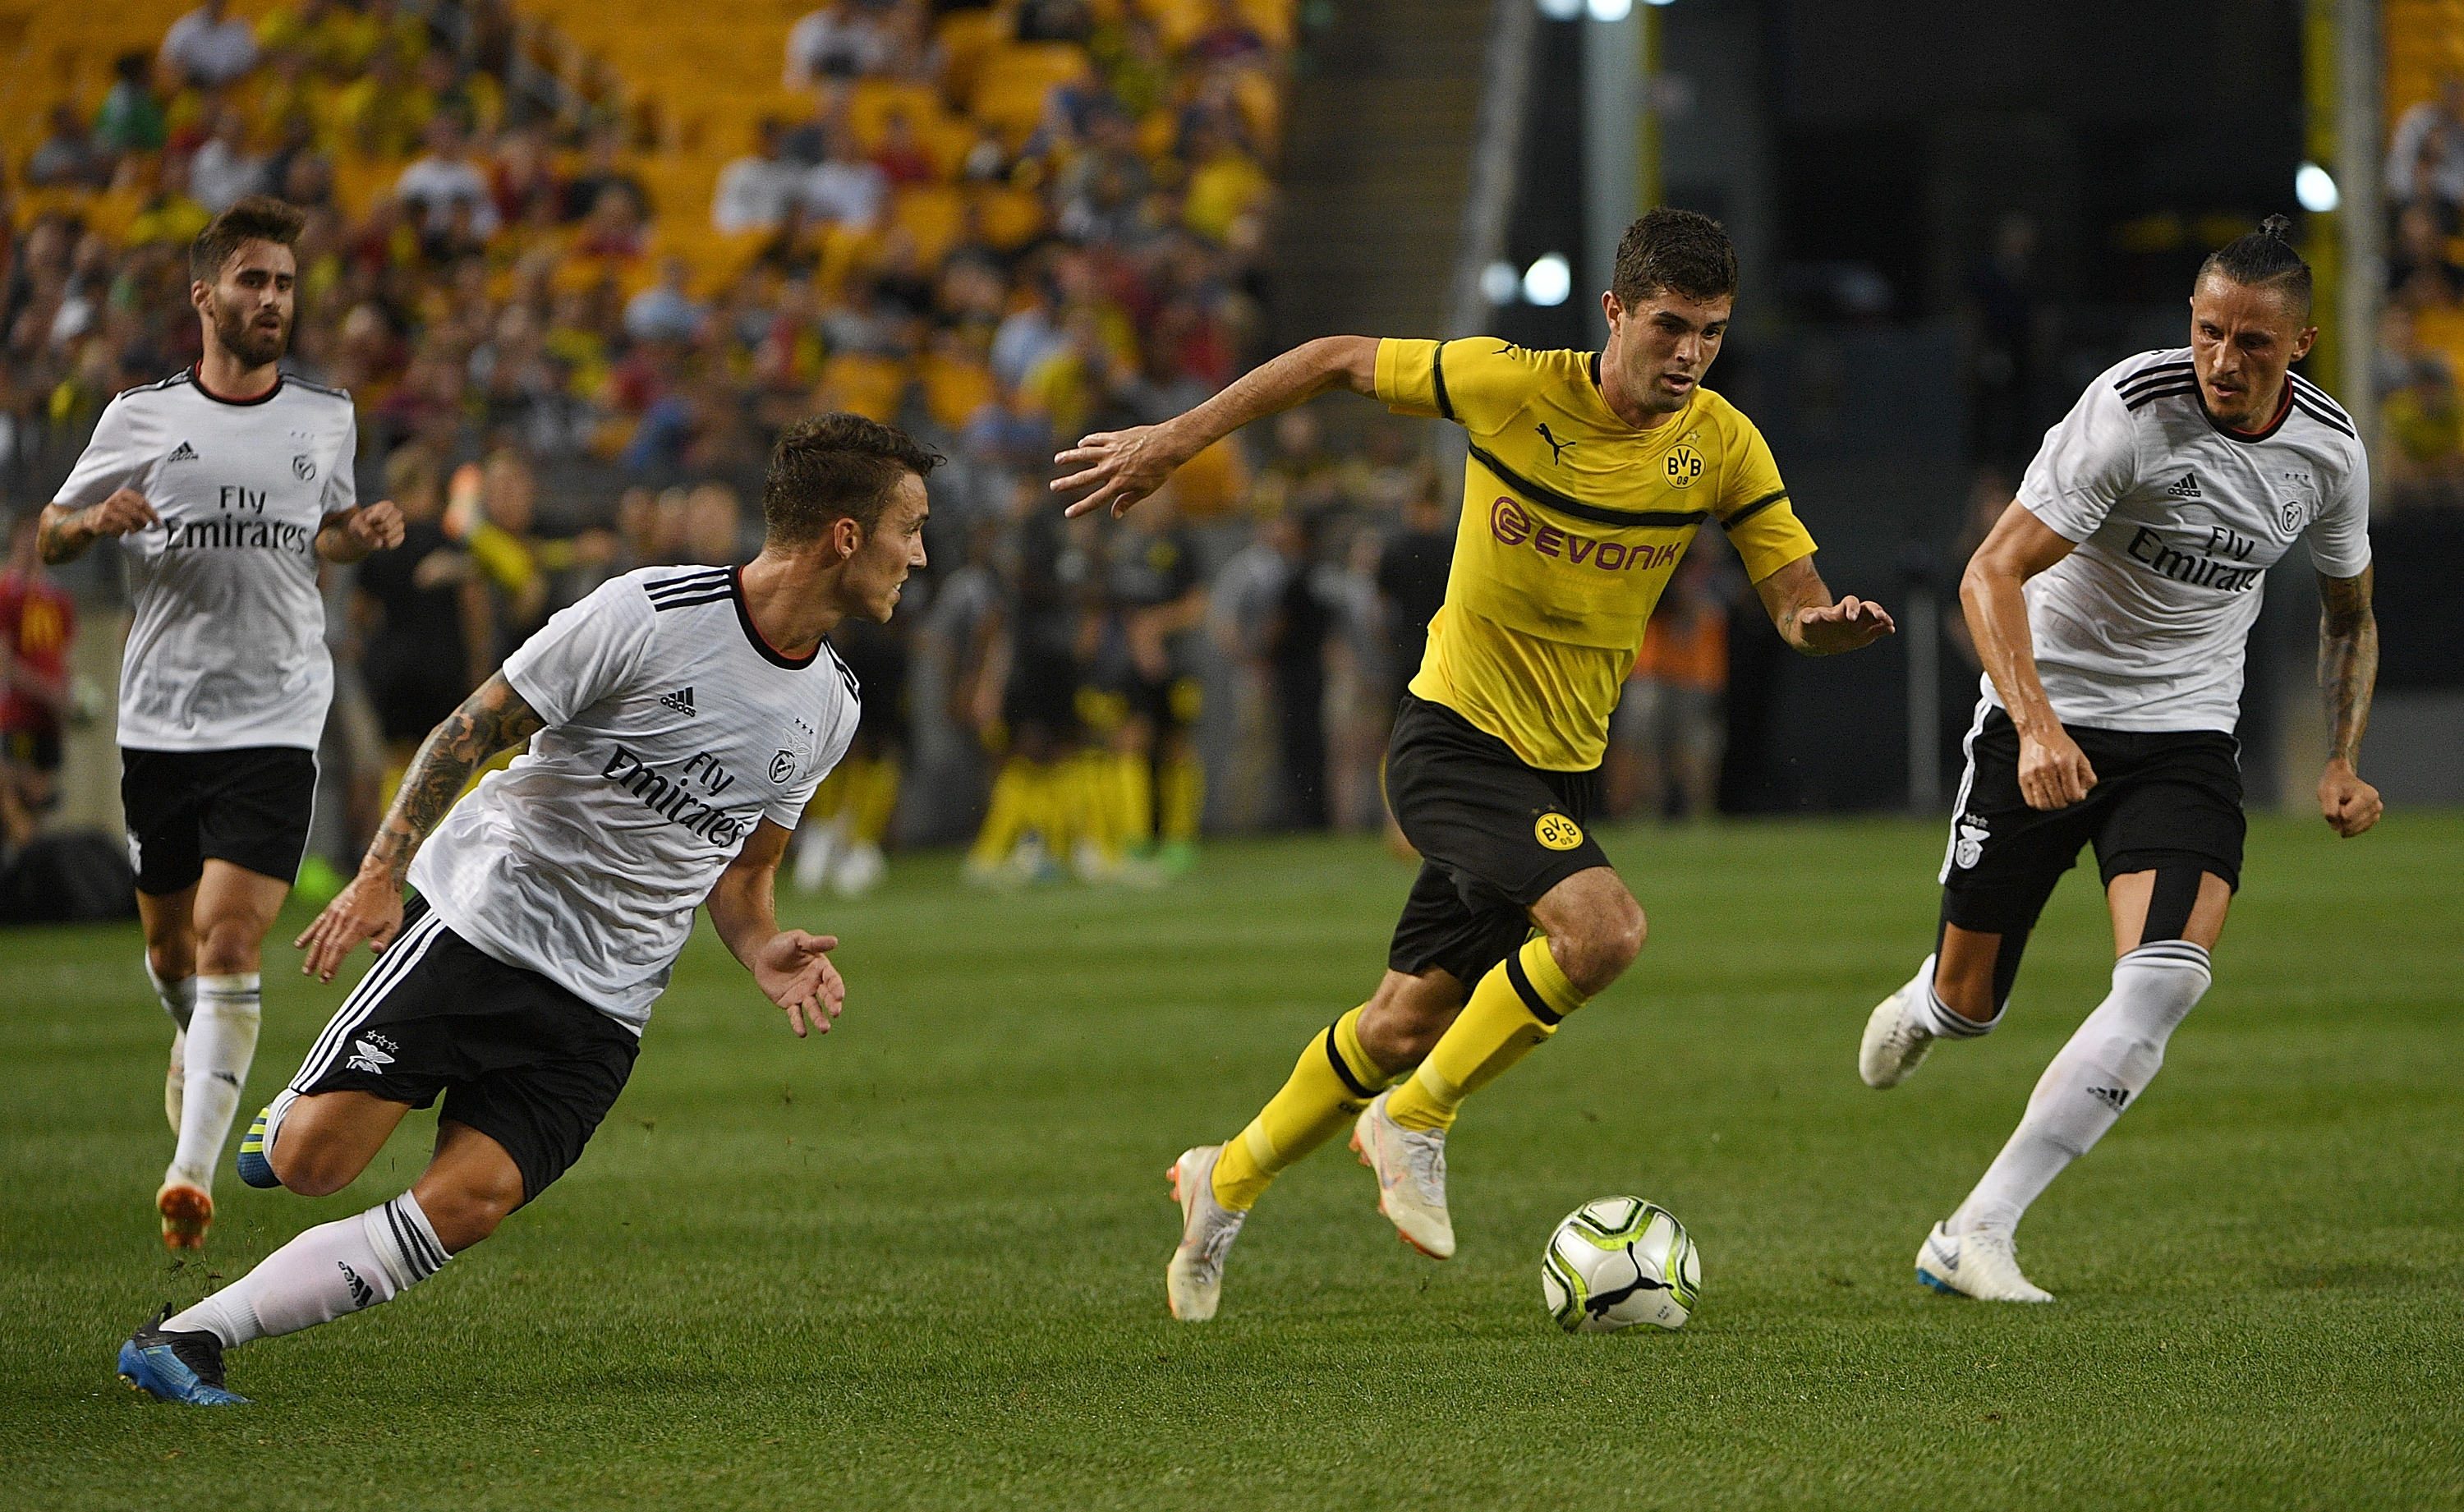 PITTSBURGH, PA - JULY 25: Christian Pulisic #22 of Borussia Dortmund controls the ball as he runs past Alex Grimaldo #3 and Ljubomir Fejsa #5 of Benfica in the first half during the 2018 International Champions Cup match at Heinz Field on July 25, 2018 in Pittsburgh, Pennsylvania. (Photo by Justin Berl/Getty Images)